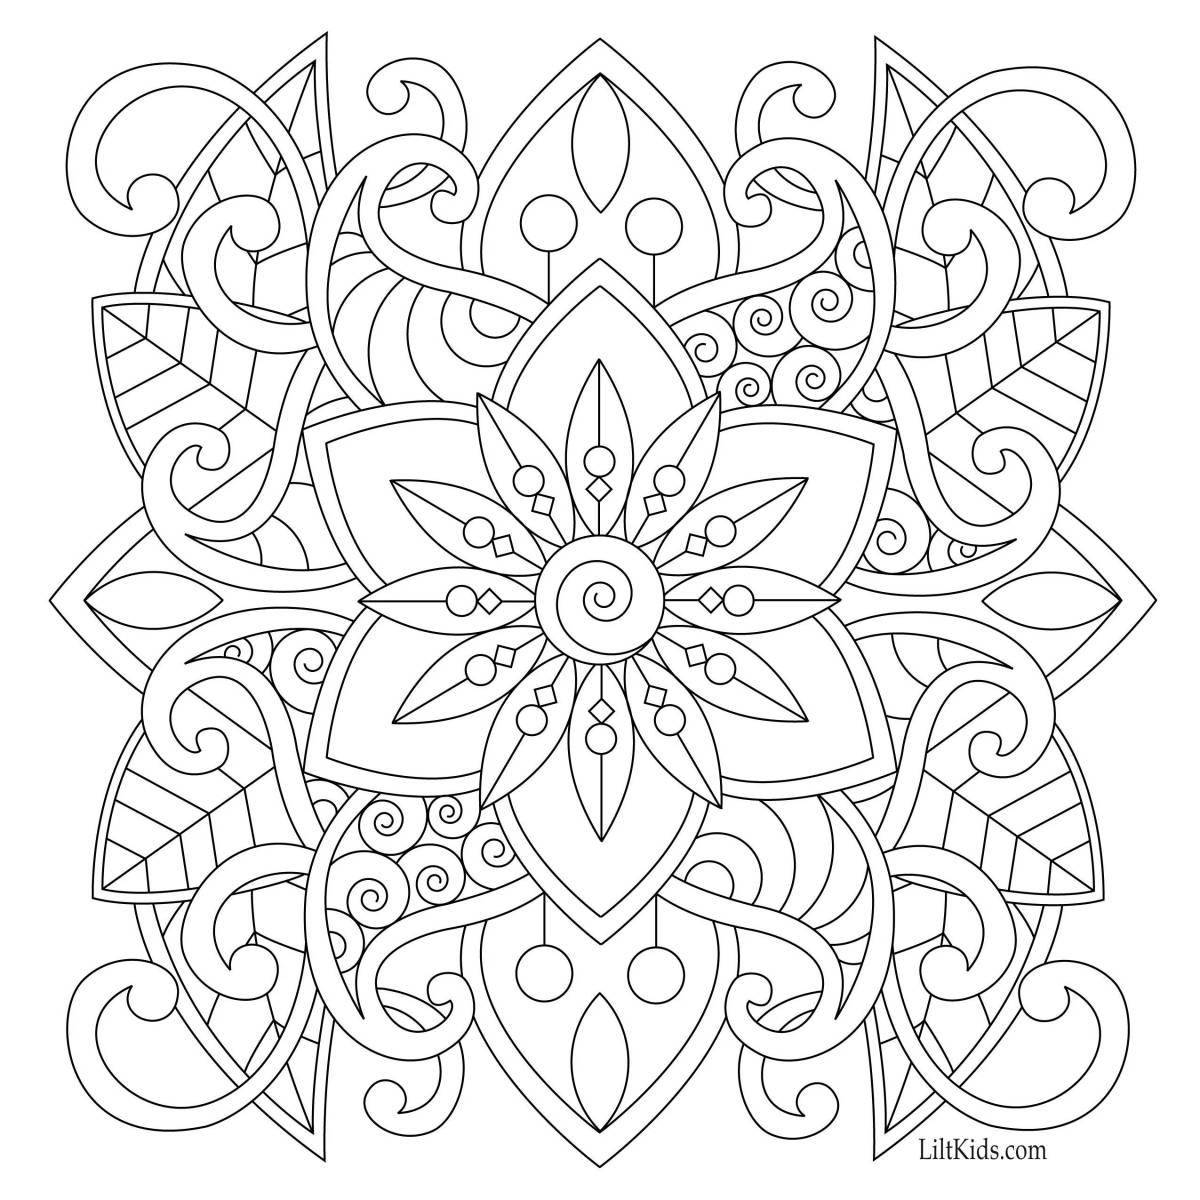 Creative patterns and ornaments for coloring pages